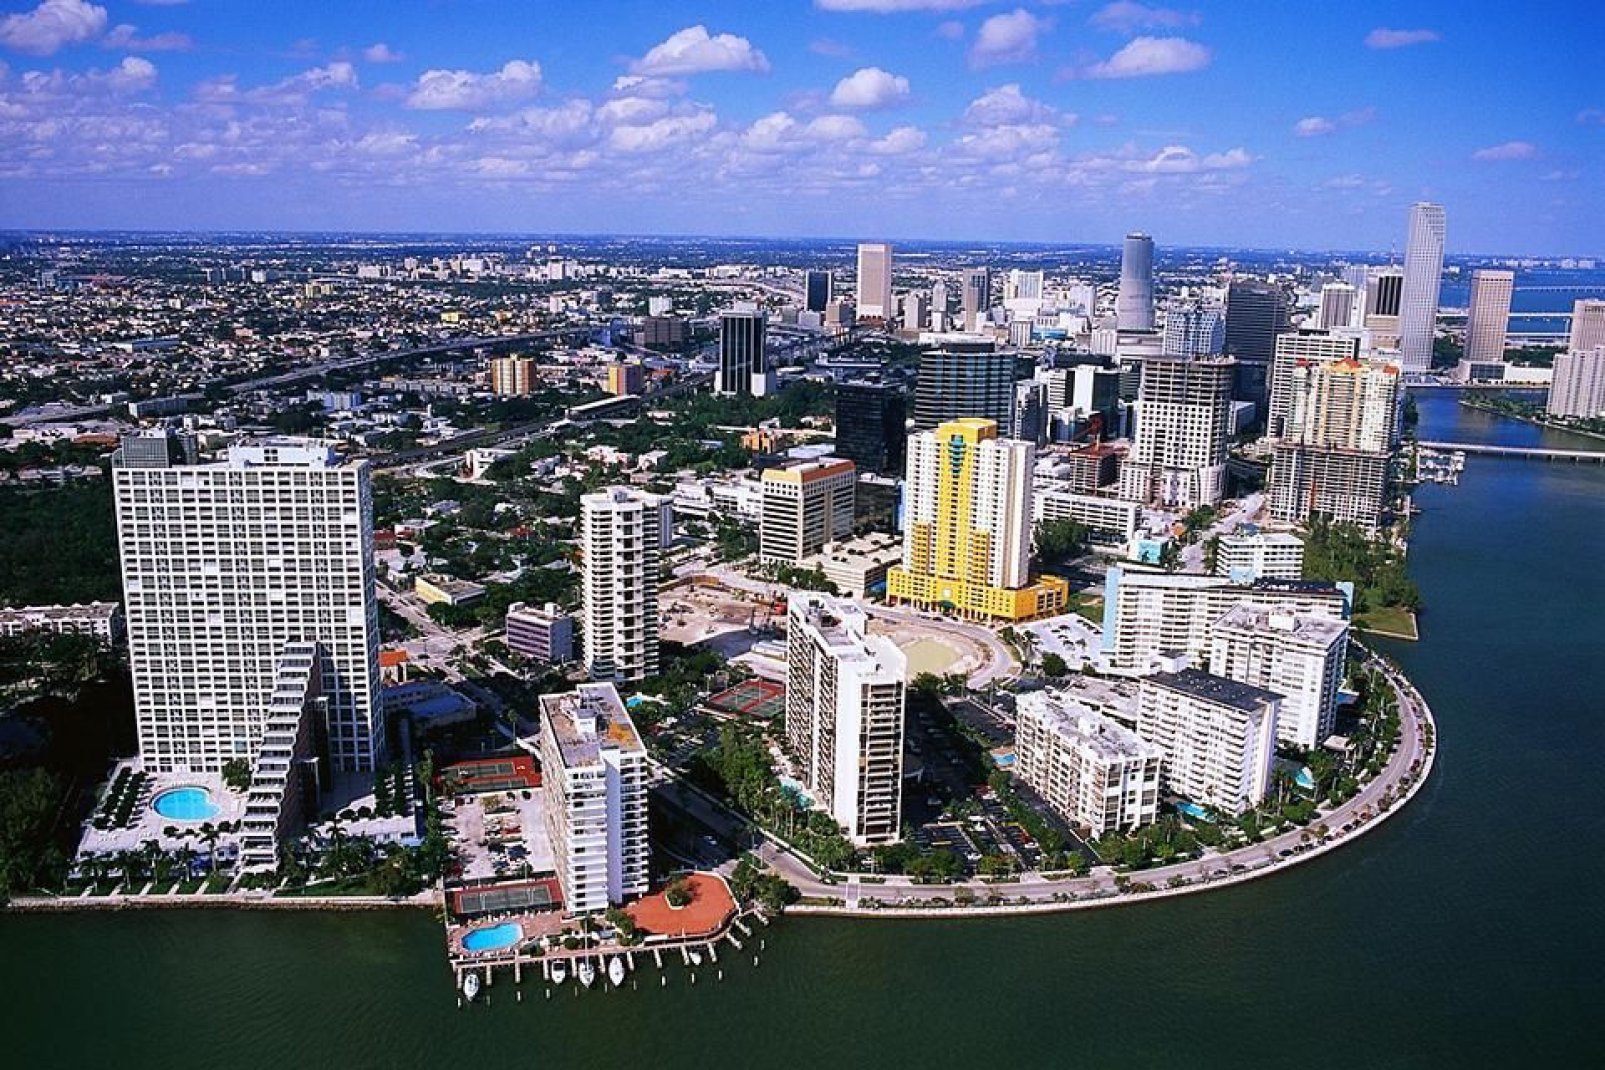 The city of Miami is nicknamed 'The Gateway to the Americas', due to its cultural, linguistic and economic vitality.